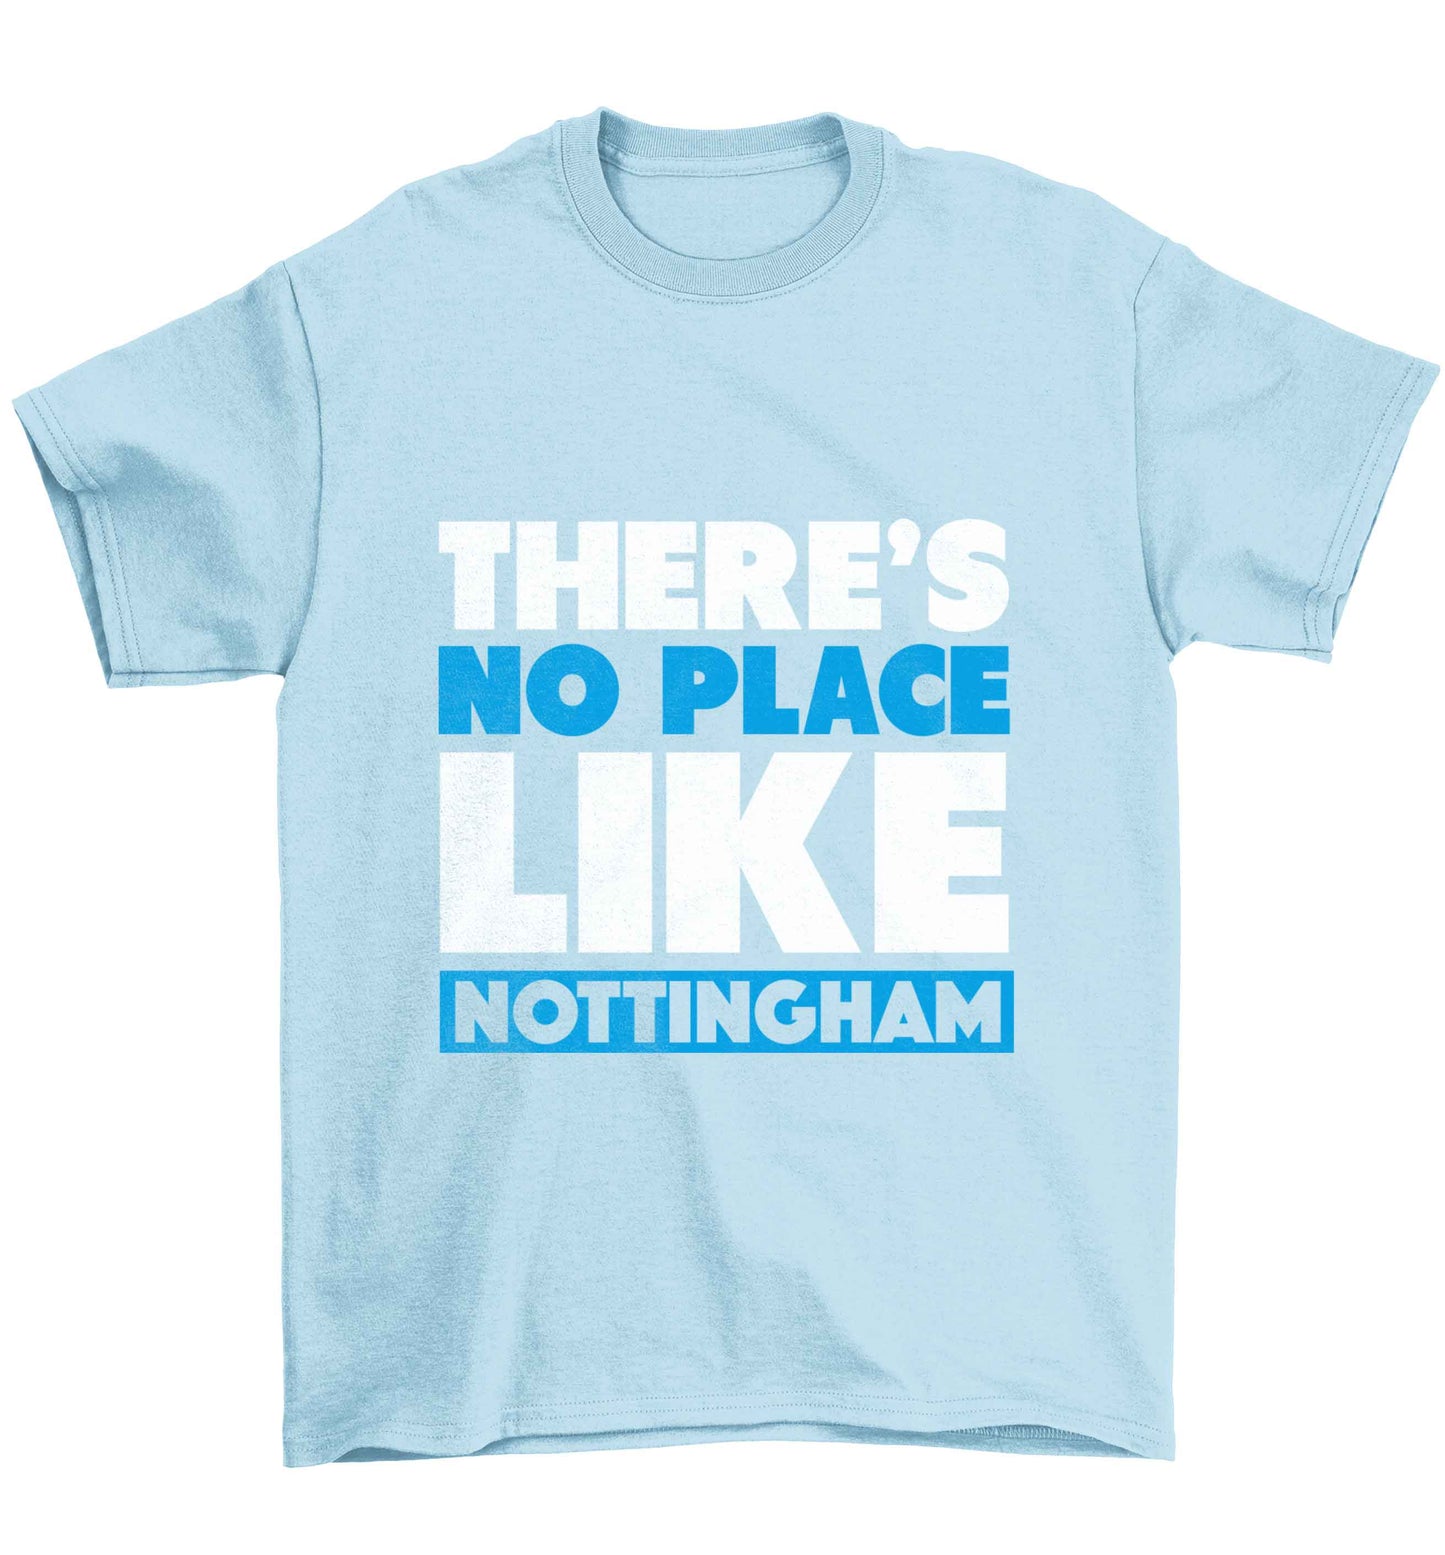 There's no place like Nottingham Children's light blue Tshirt 12-13 Years